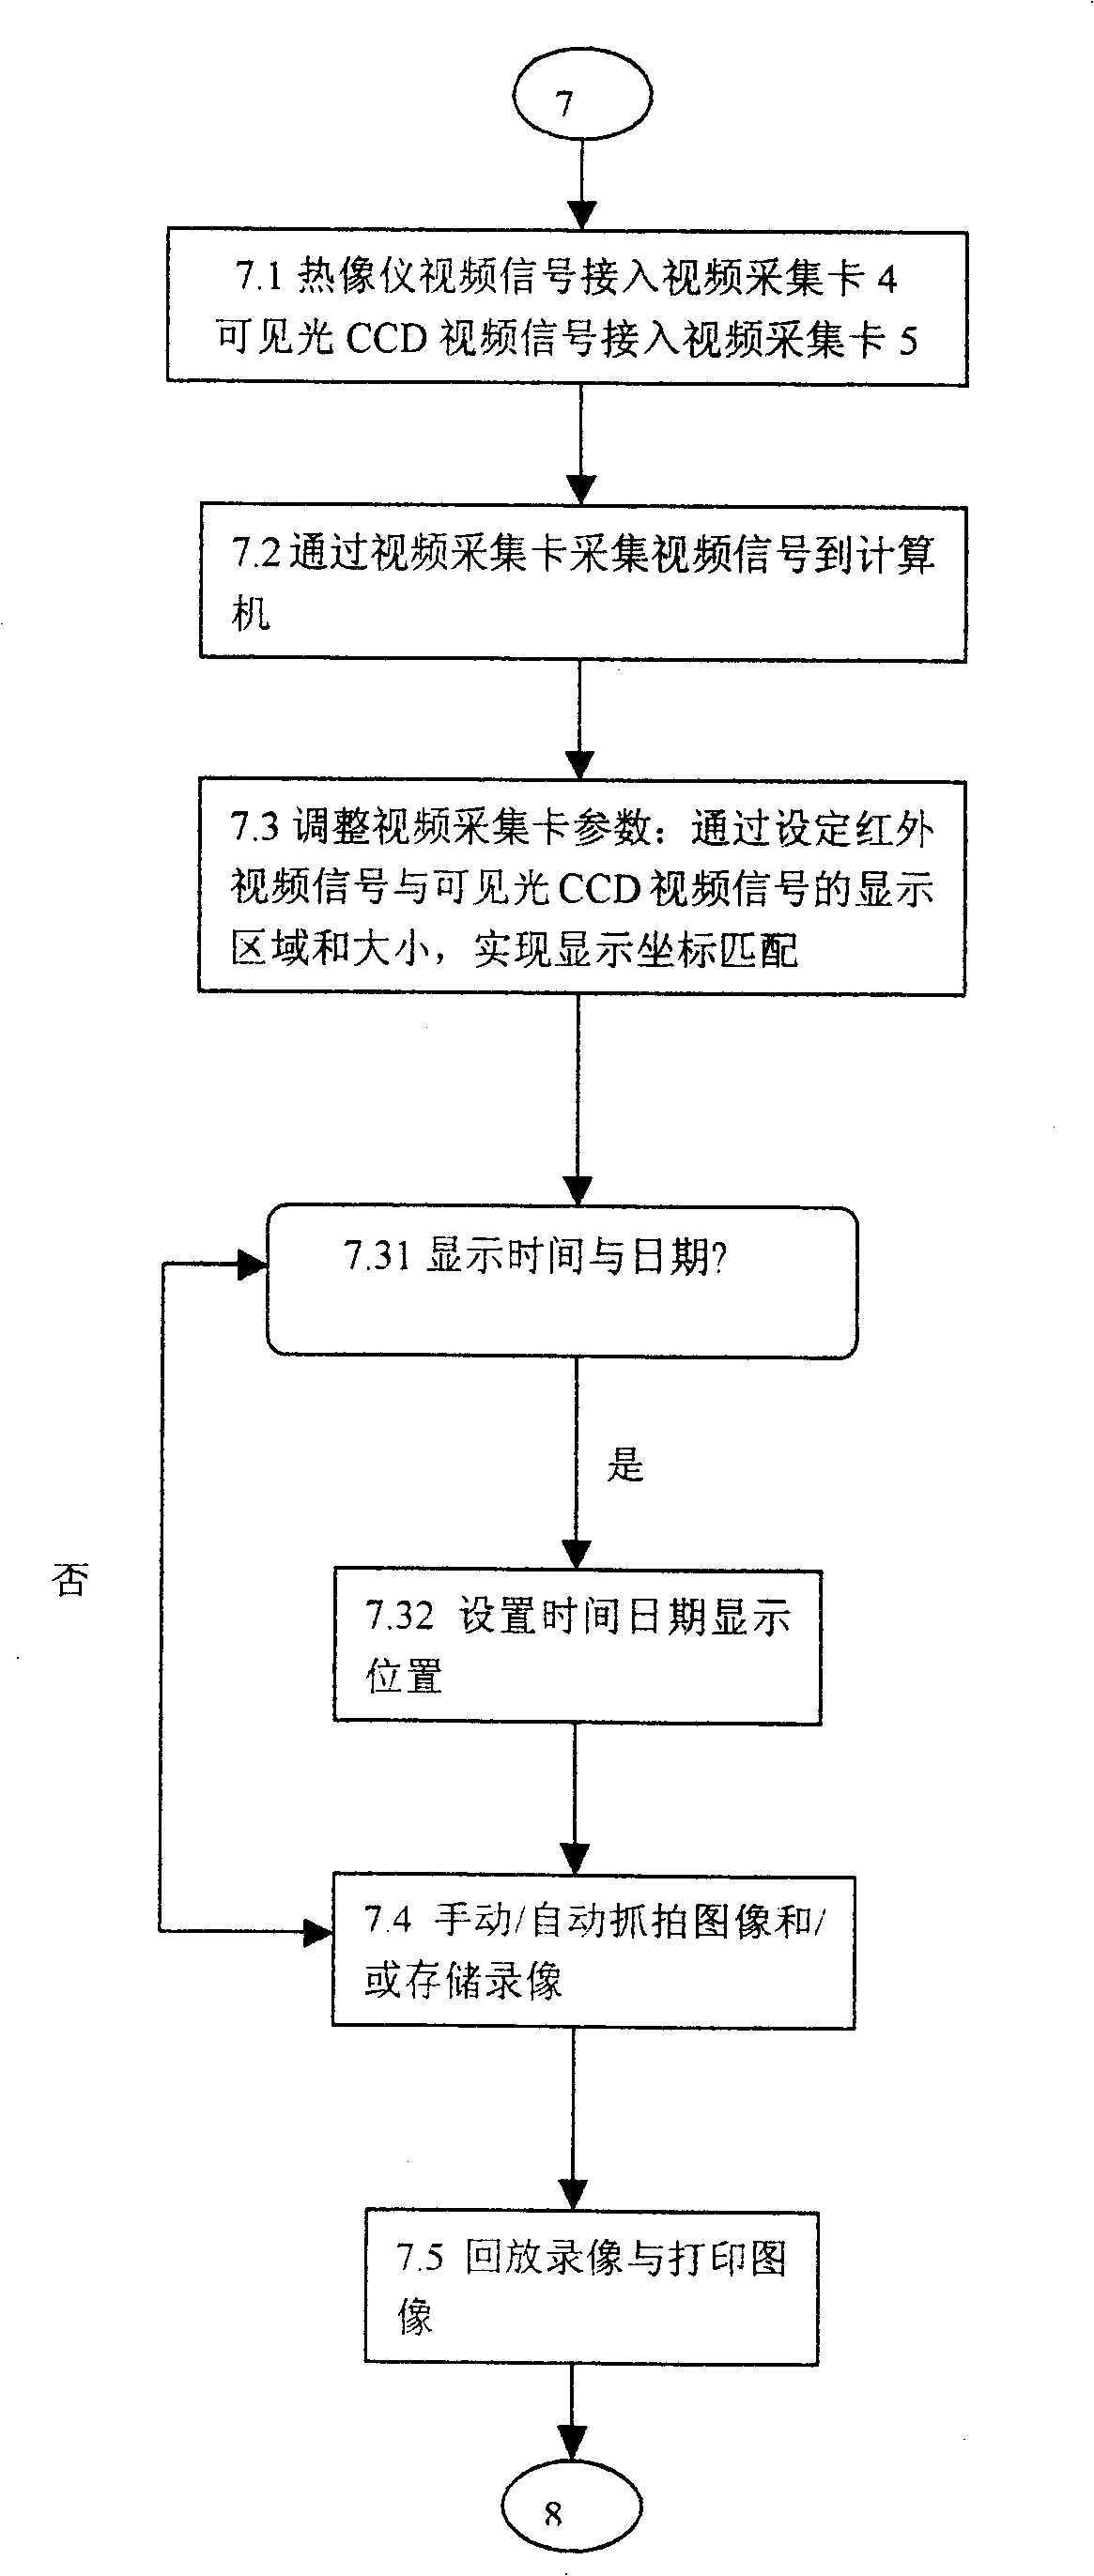 Real time display control device for composite video of infrared thermal imaging image and visible light image